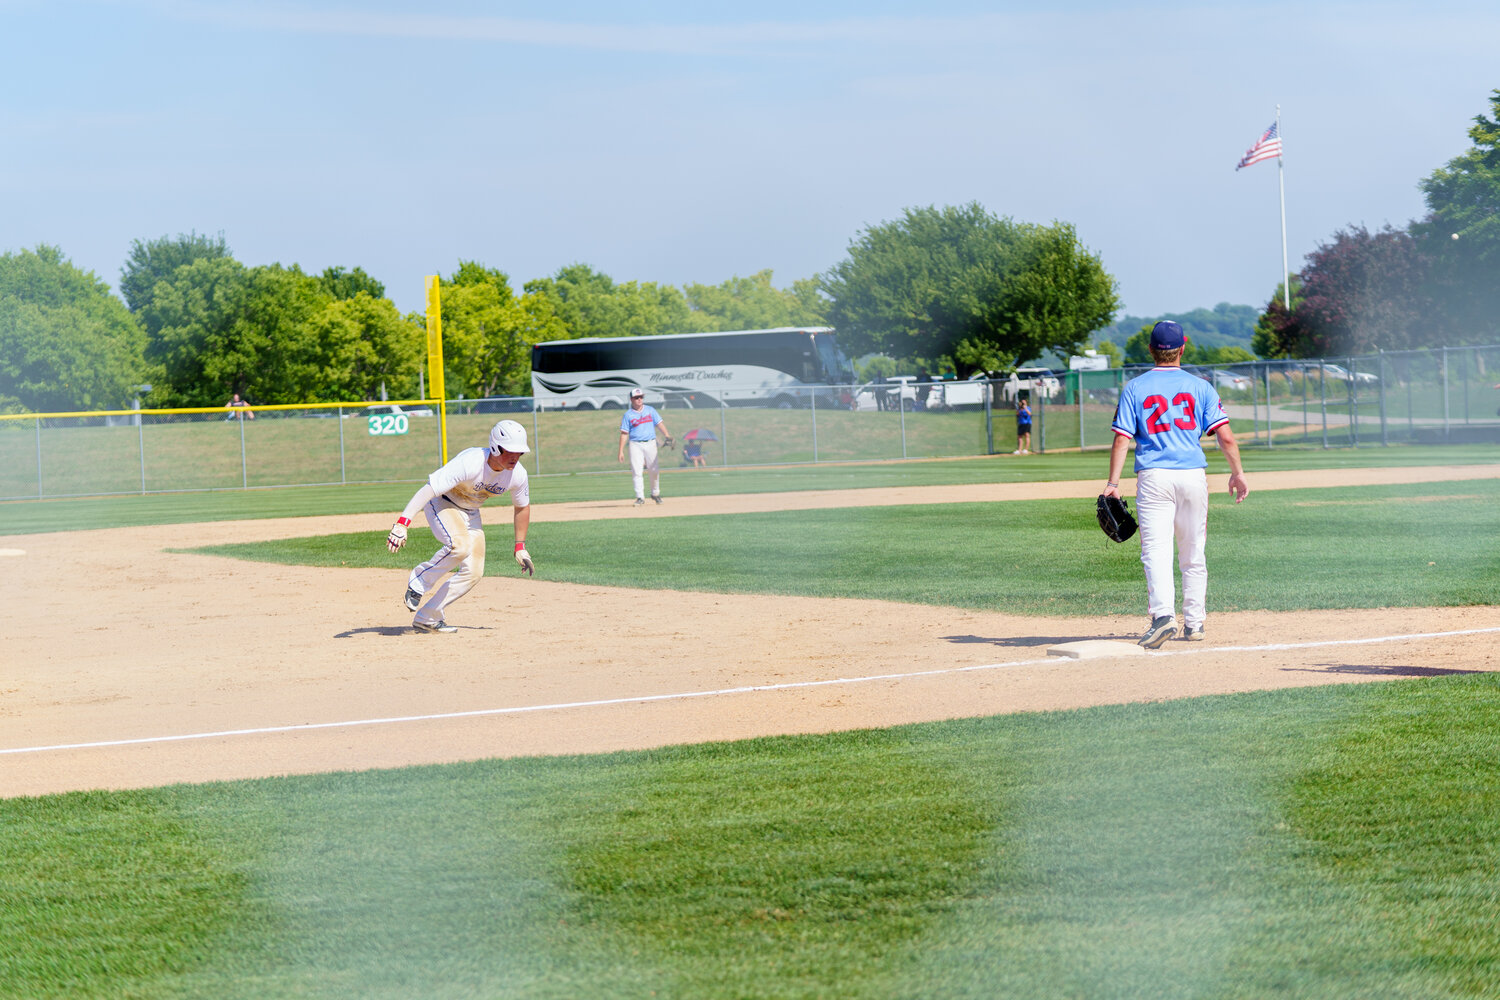 Tanner Anselment turned a bunt into a hit with a two-base error in the third inning against Duluth.  Anselment scored on a Johnny Teigland sacrifice fly as part of the win over Duluth.